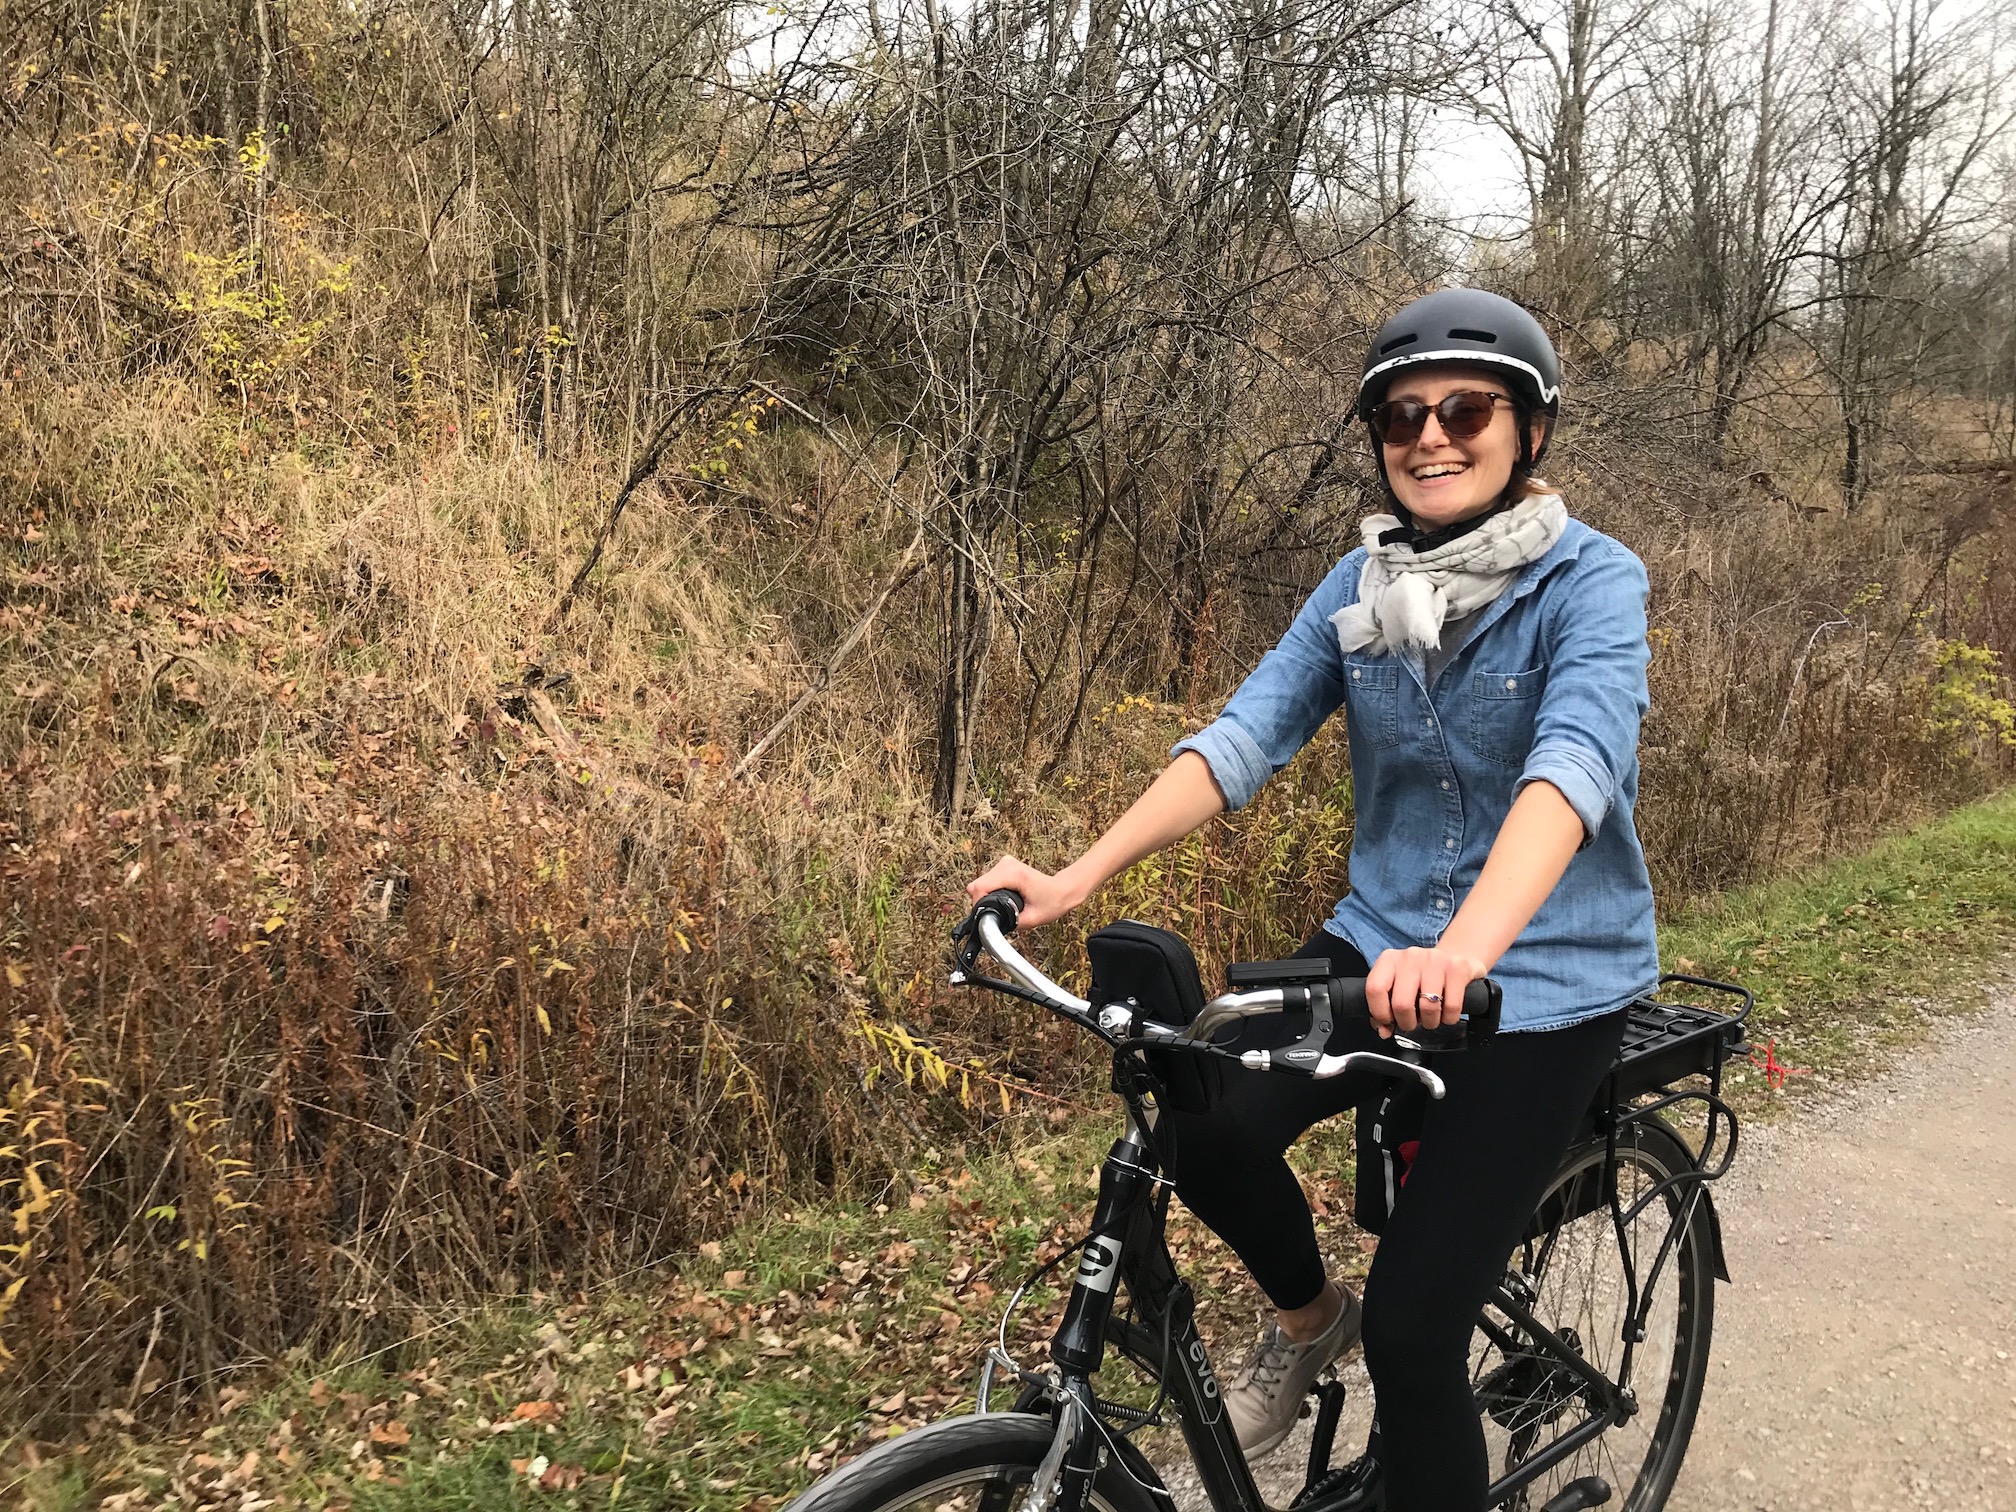 Jamie smiling while riding an electric bicycle on a trail in late Fall